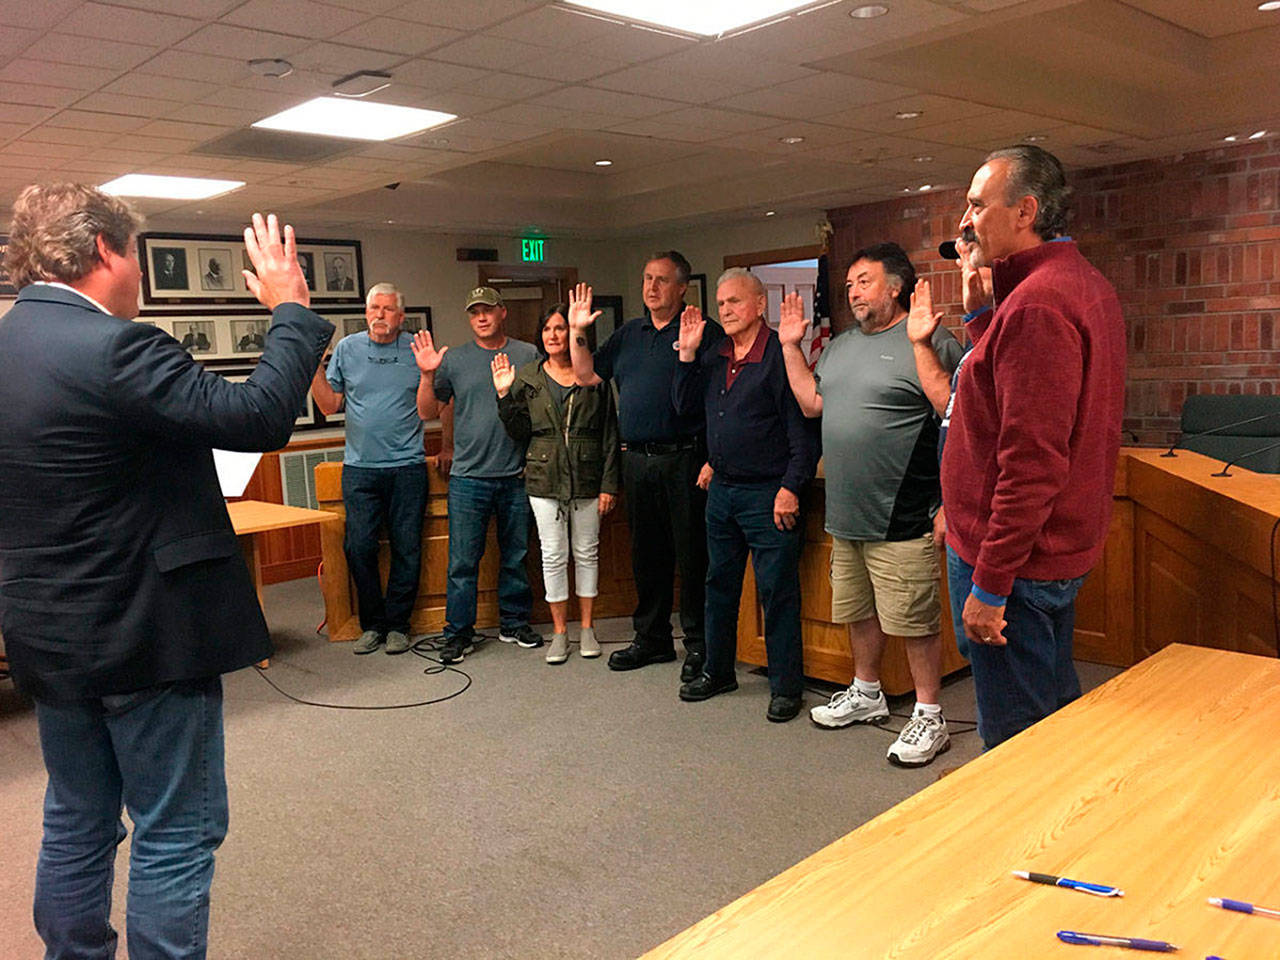 In July 2019, King County Council member Reagan Dunn swore in new Commissioners from Drainage Districts 5, 6 and 13. Left to right, Reagan Dunn, John Koopman, Kenny Bosnik, Cathy Dahlquist, Alan Predmore, Jim Puttman, John Millarich, Mark Van Wiernigan, and David Ballestrasse. Contributed by David Shurtleff